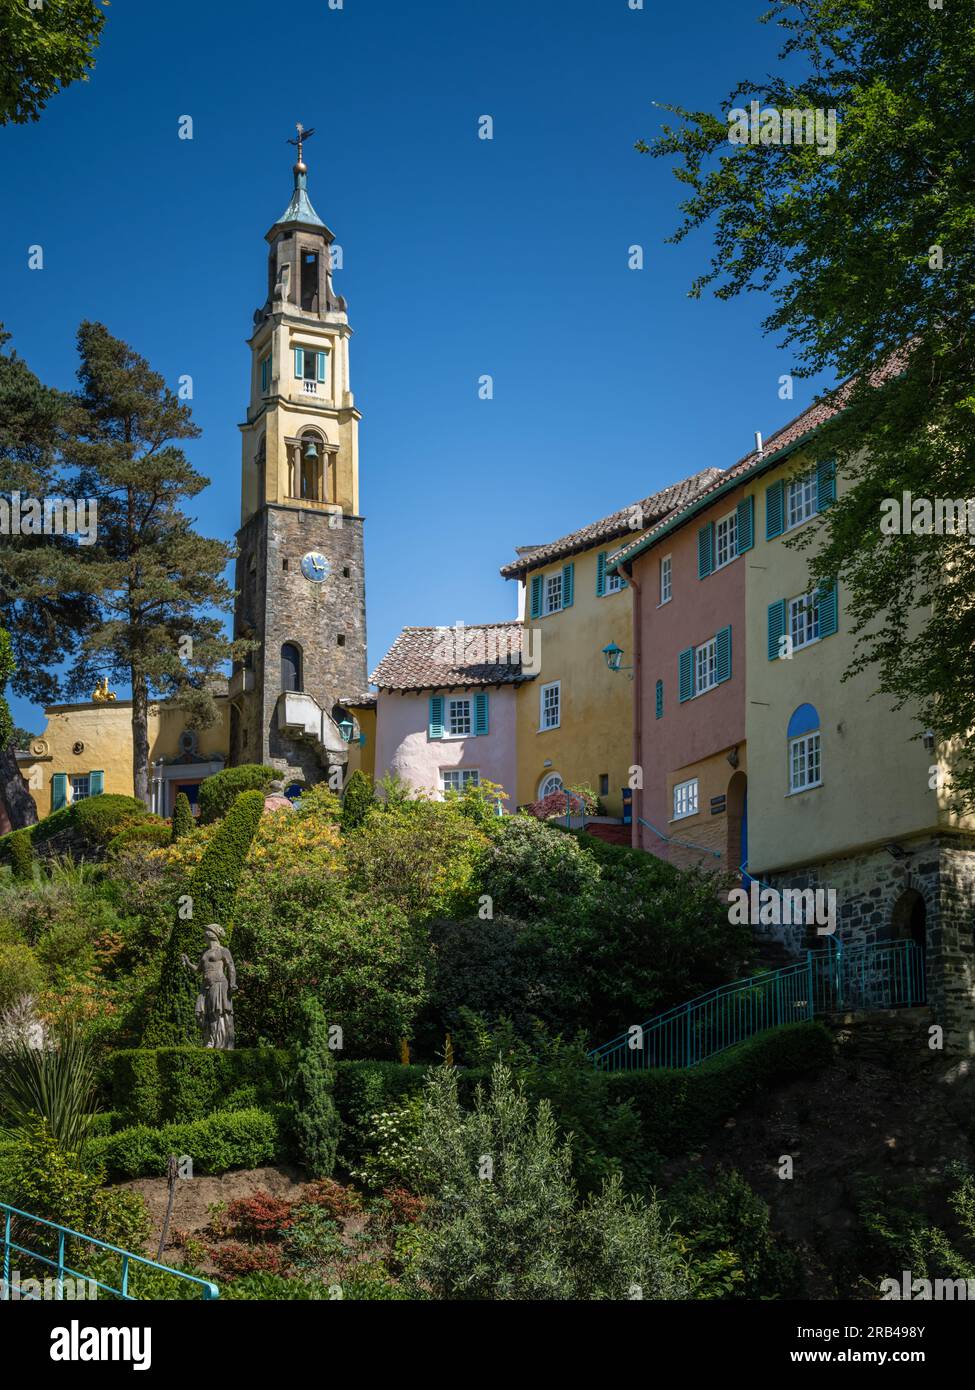 The Bell Tower, Portmeirion, North Wales, Regno Unito Foto Stock